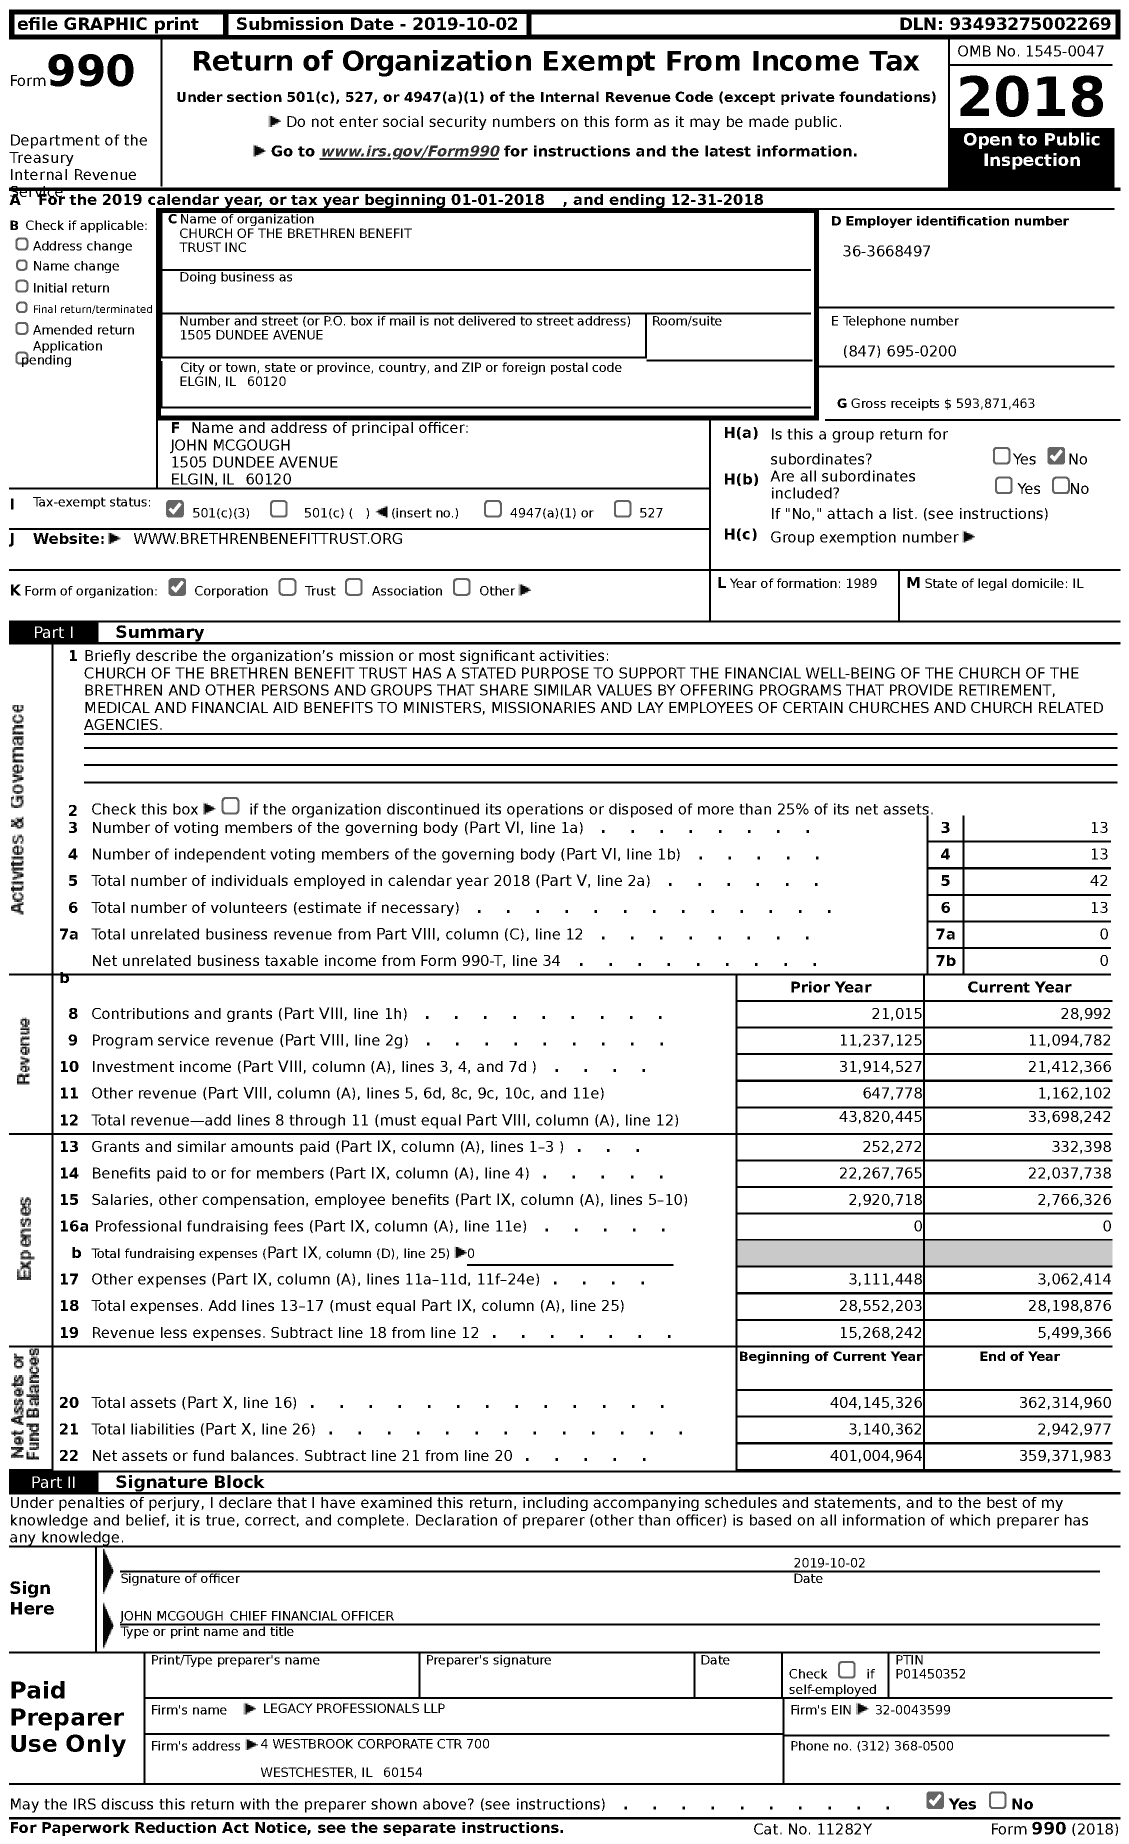 Image of first page of 2018 Form 990 for Eder Financial (BBT)